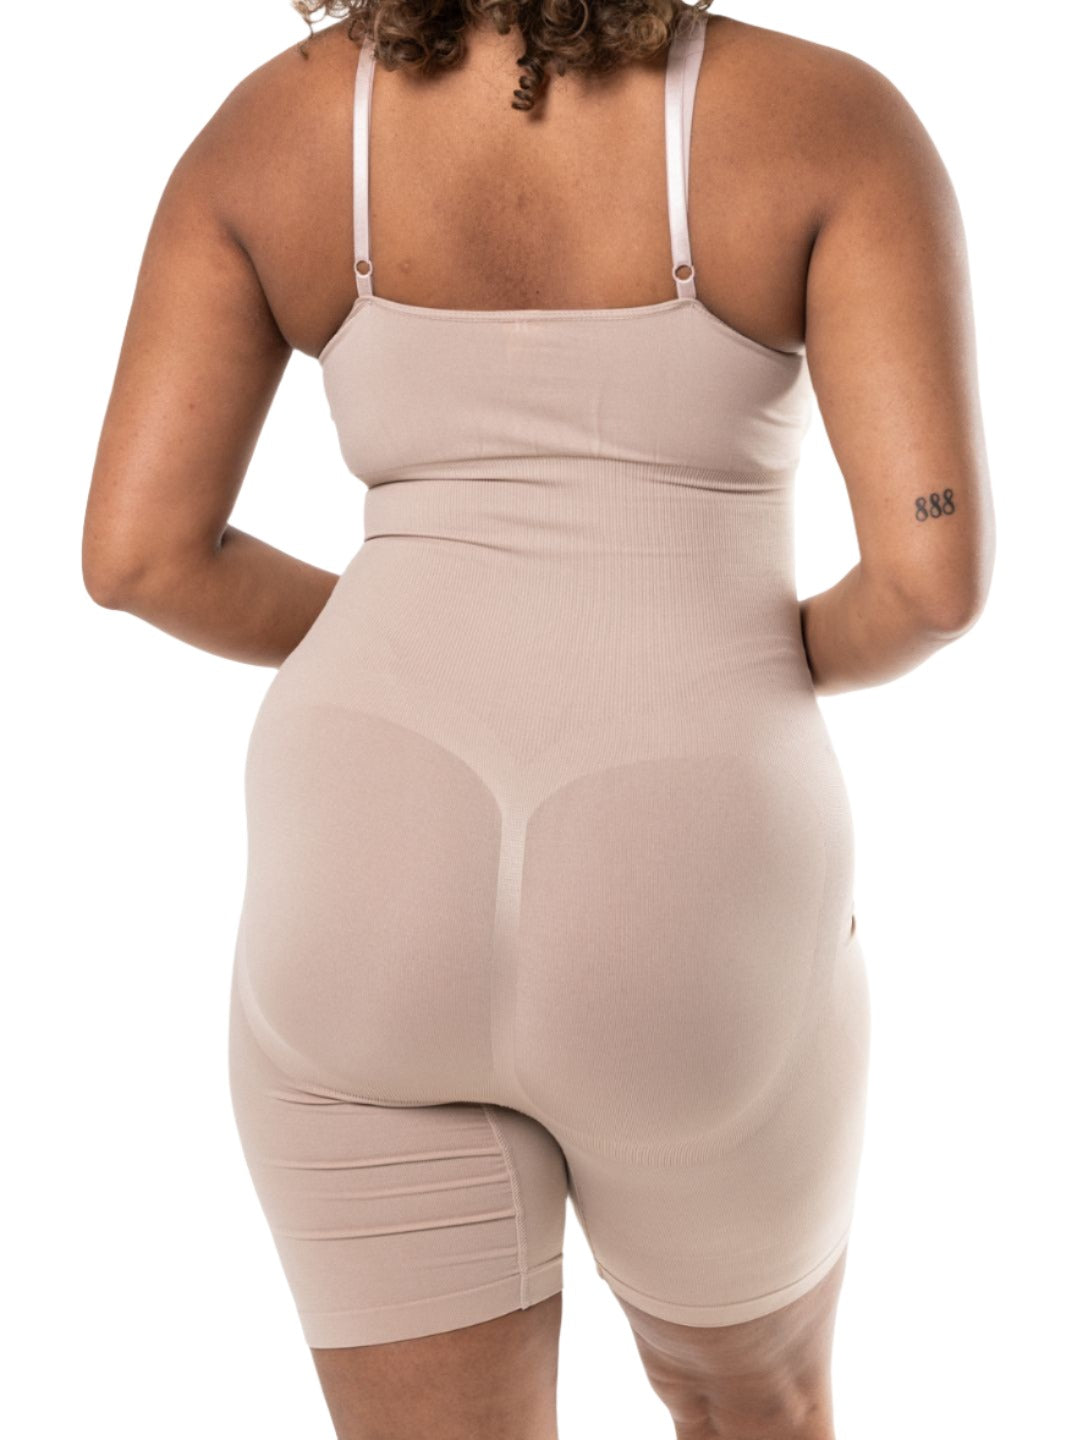 10 of the Best Shapewear Bodysuits for Larger Busts